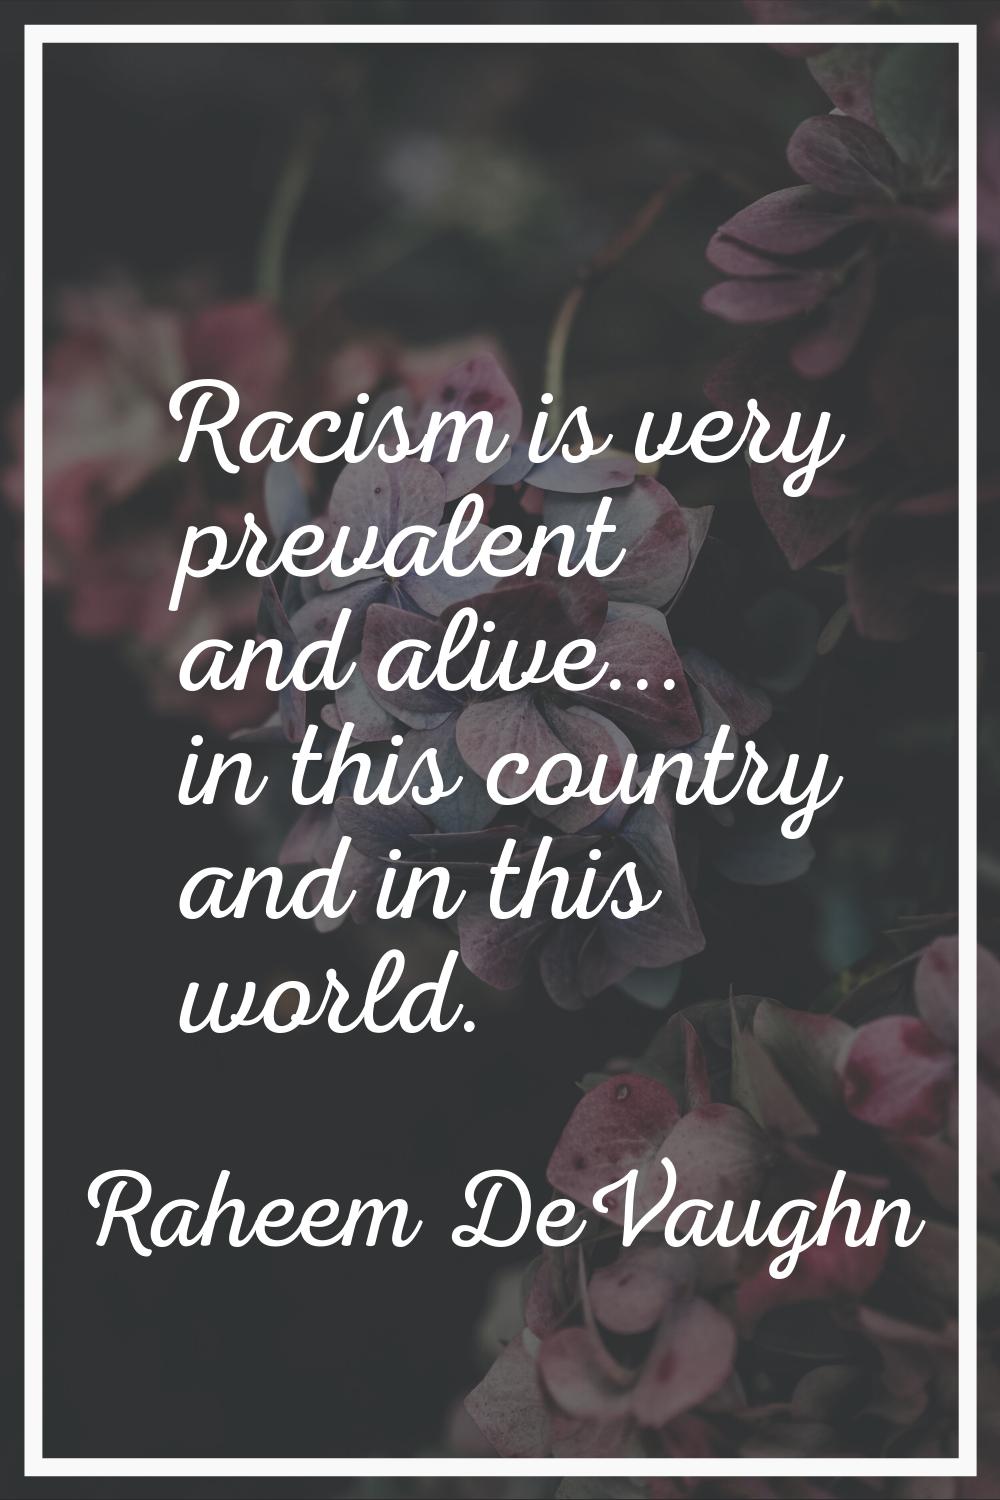 Racism is very prevalent and alive... in this country and in this world.